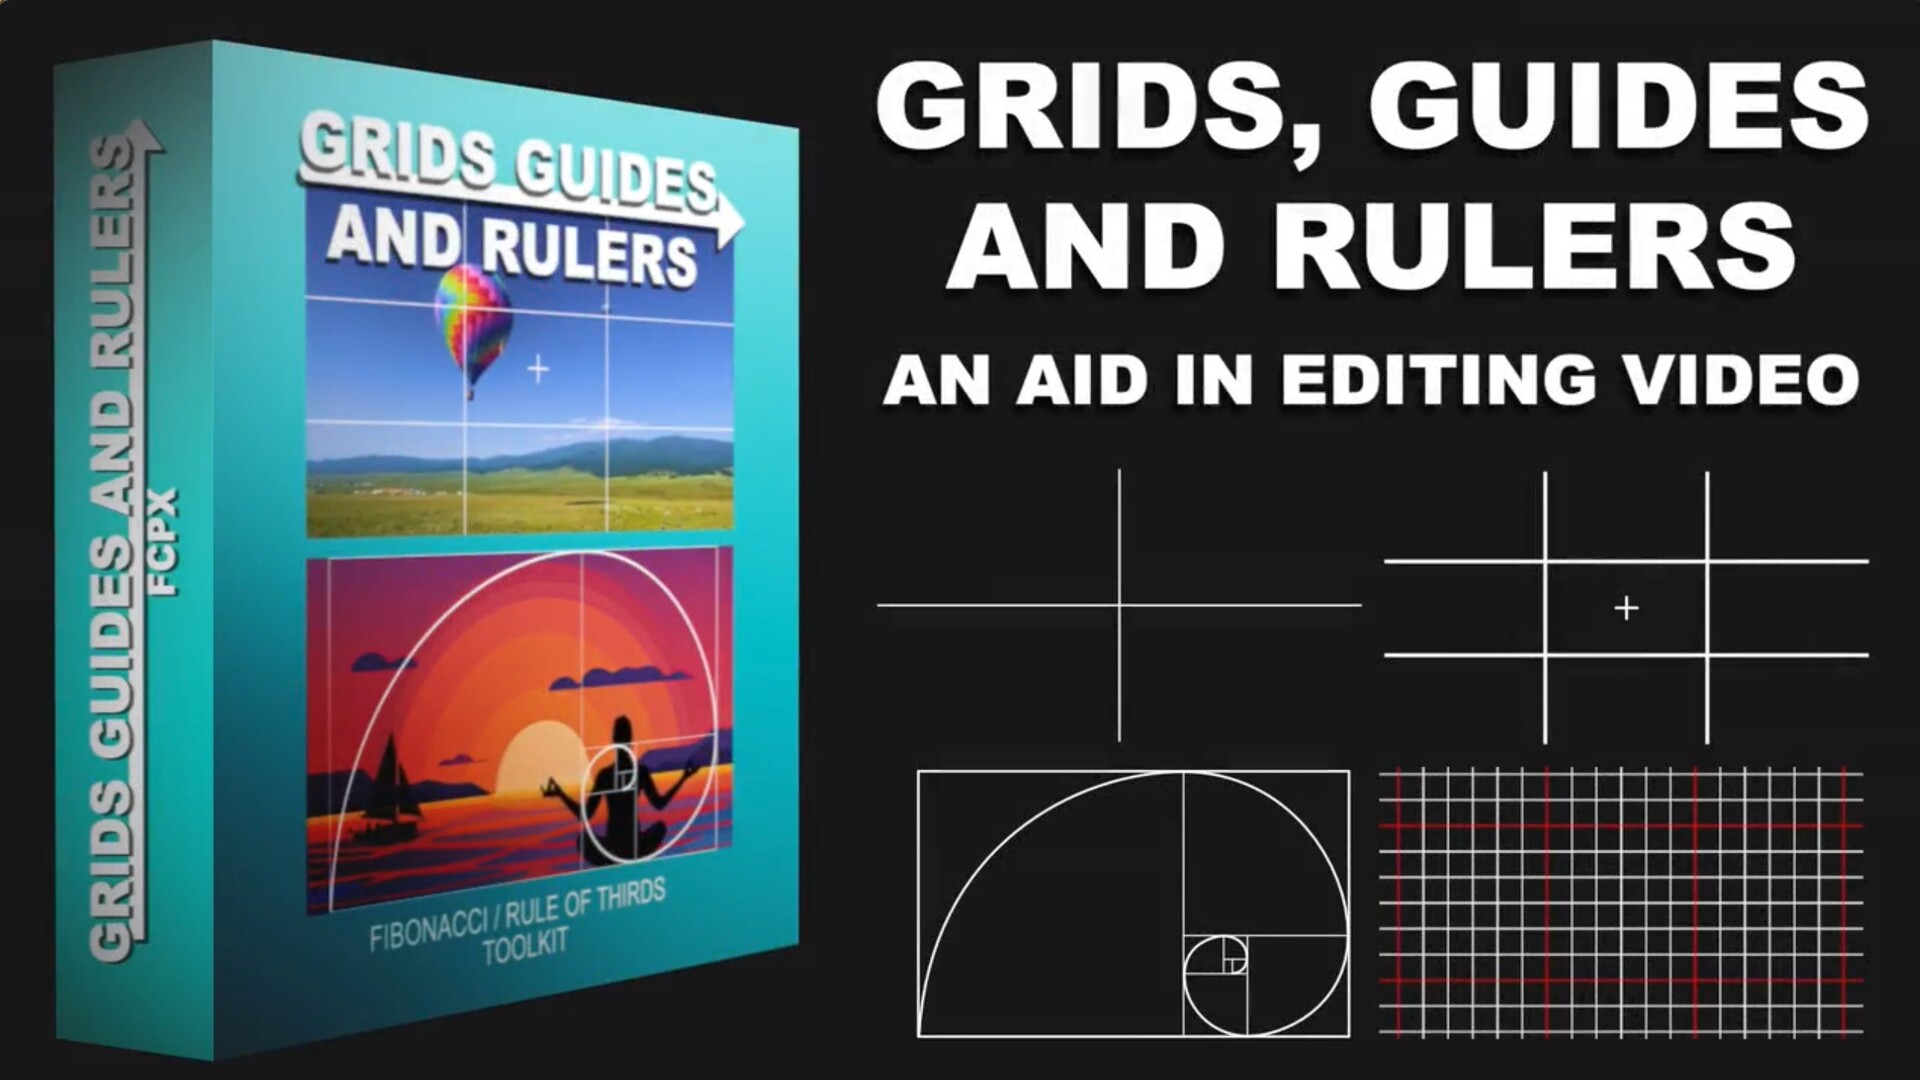 FCPX插件:15个网格指南和标尺素材Grids Guides and Rulers